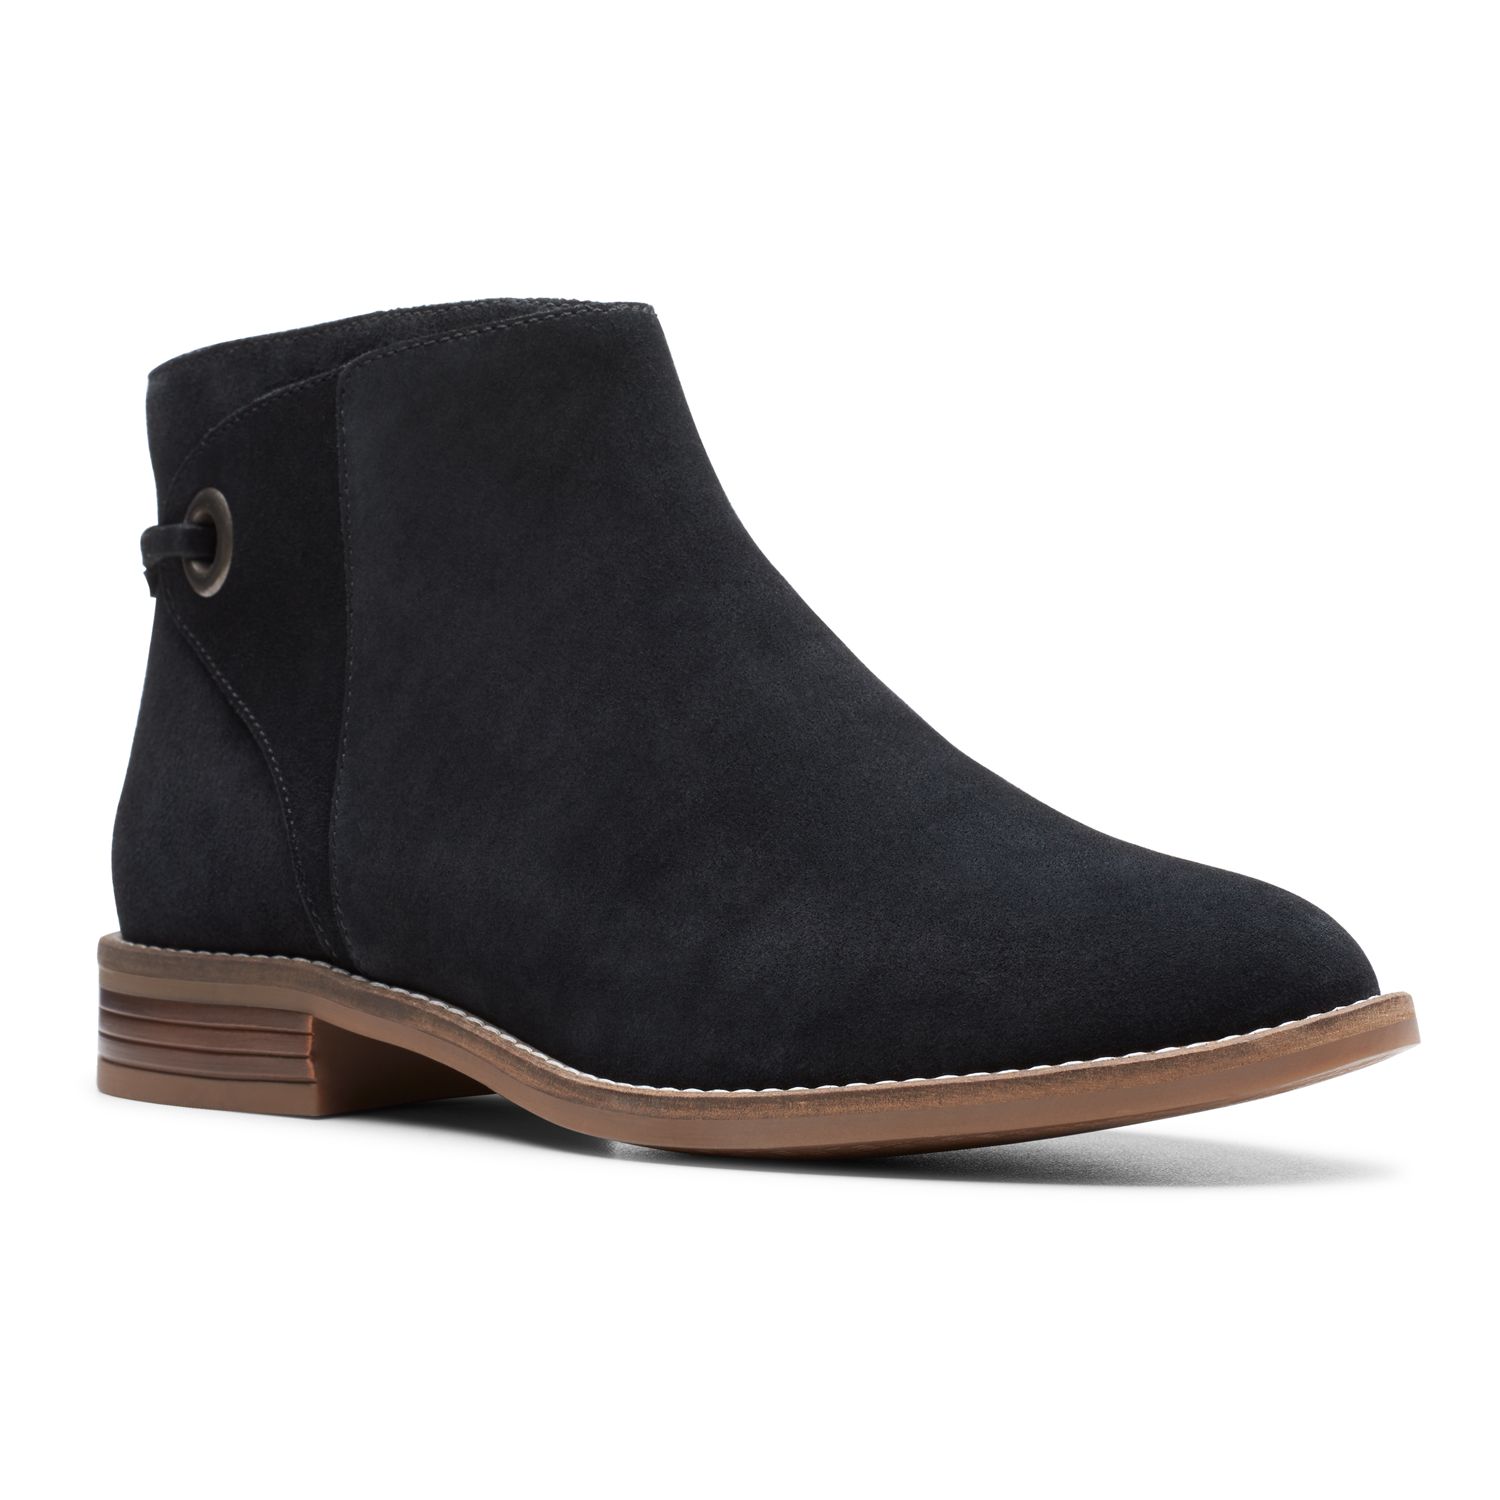 Clarks® Camzin Bow Women's Ankle Boots